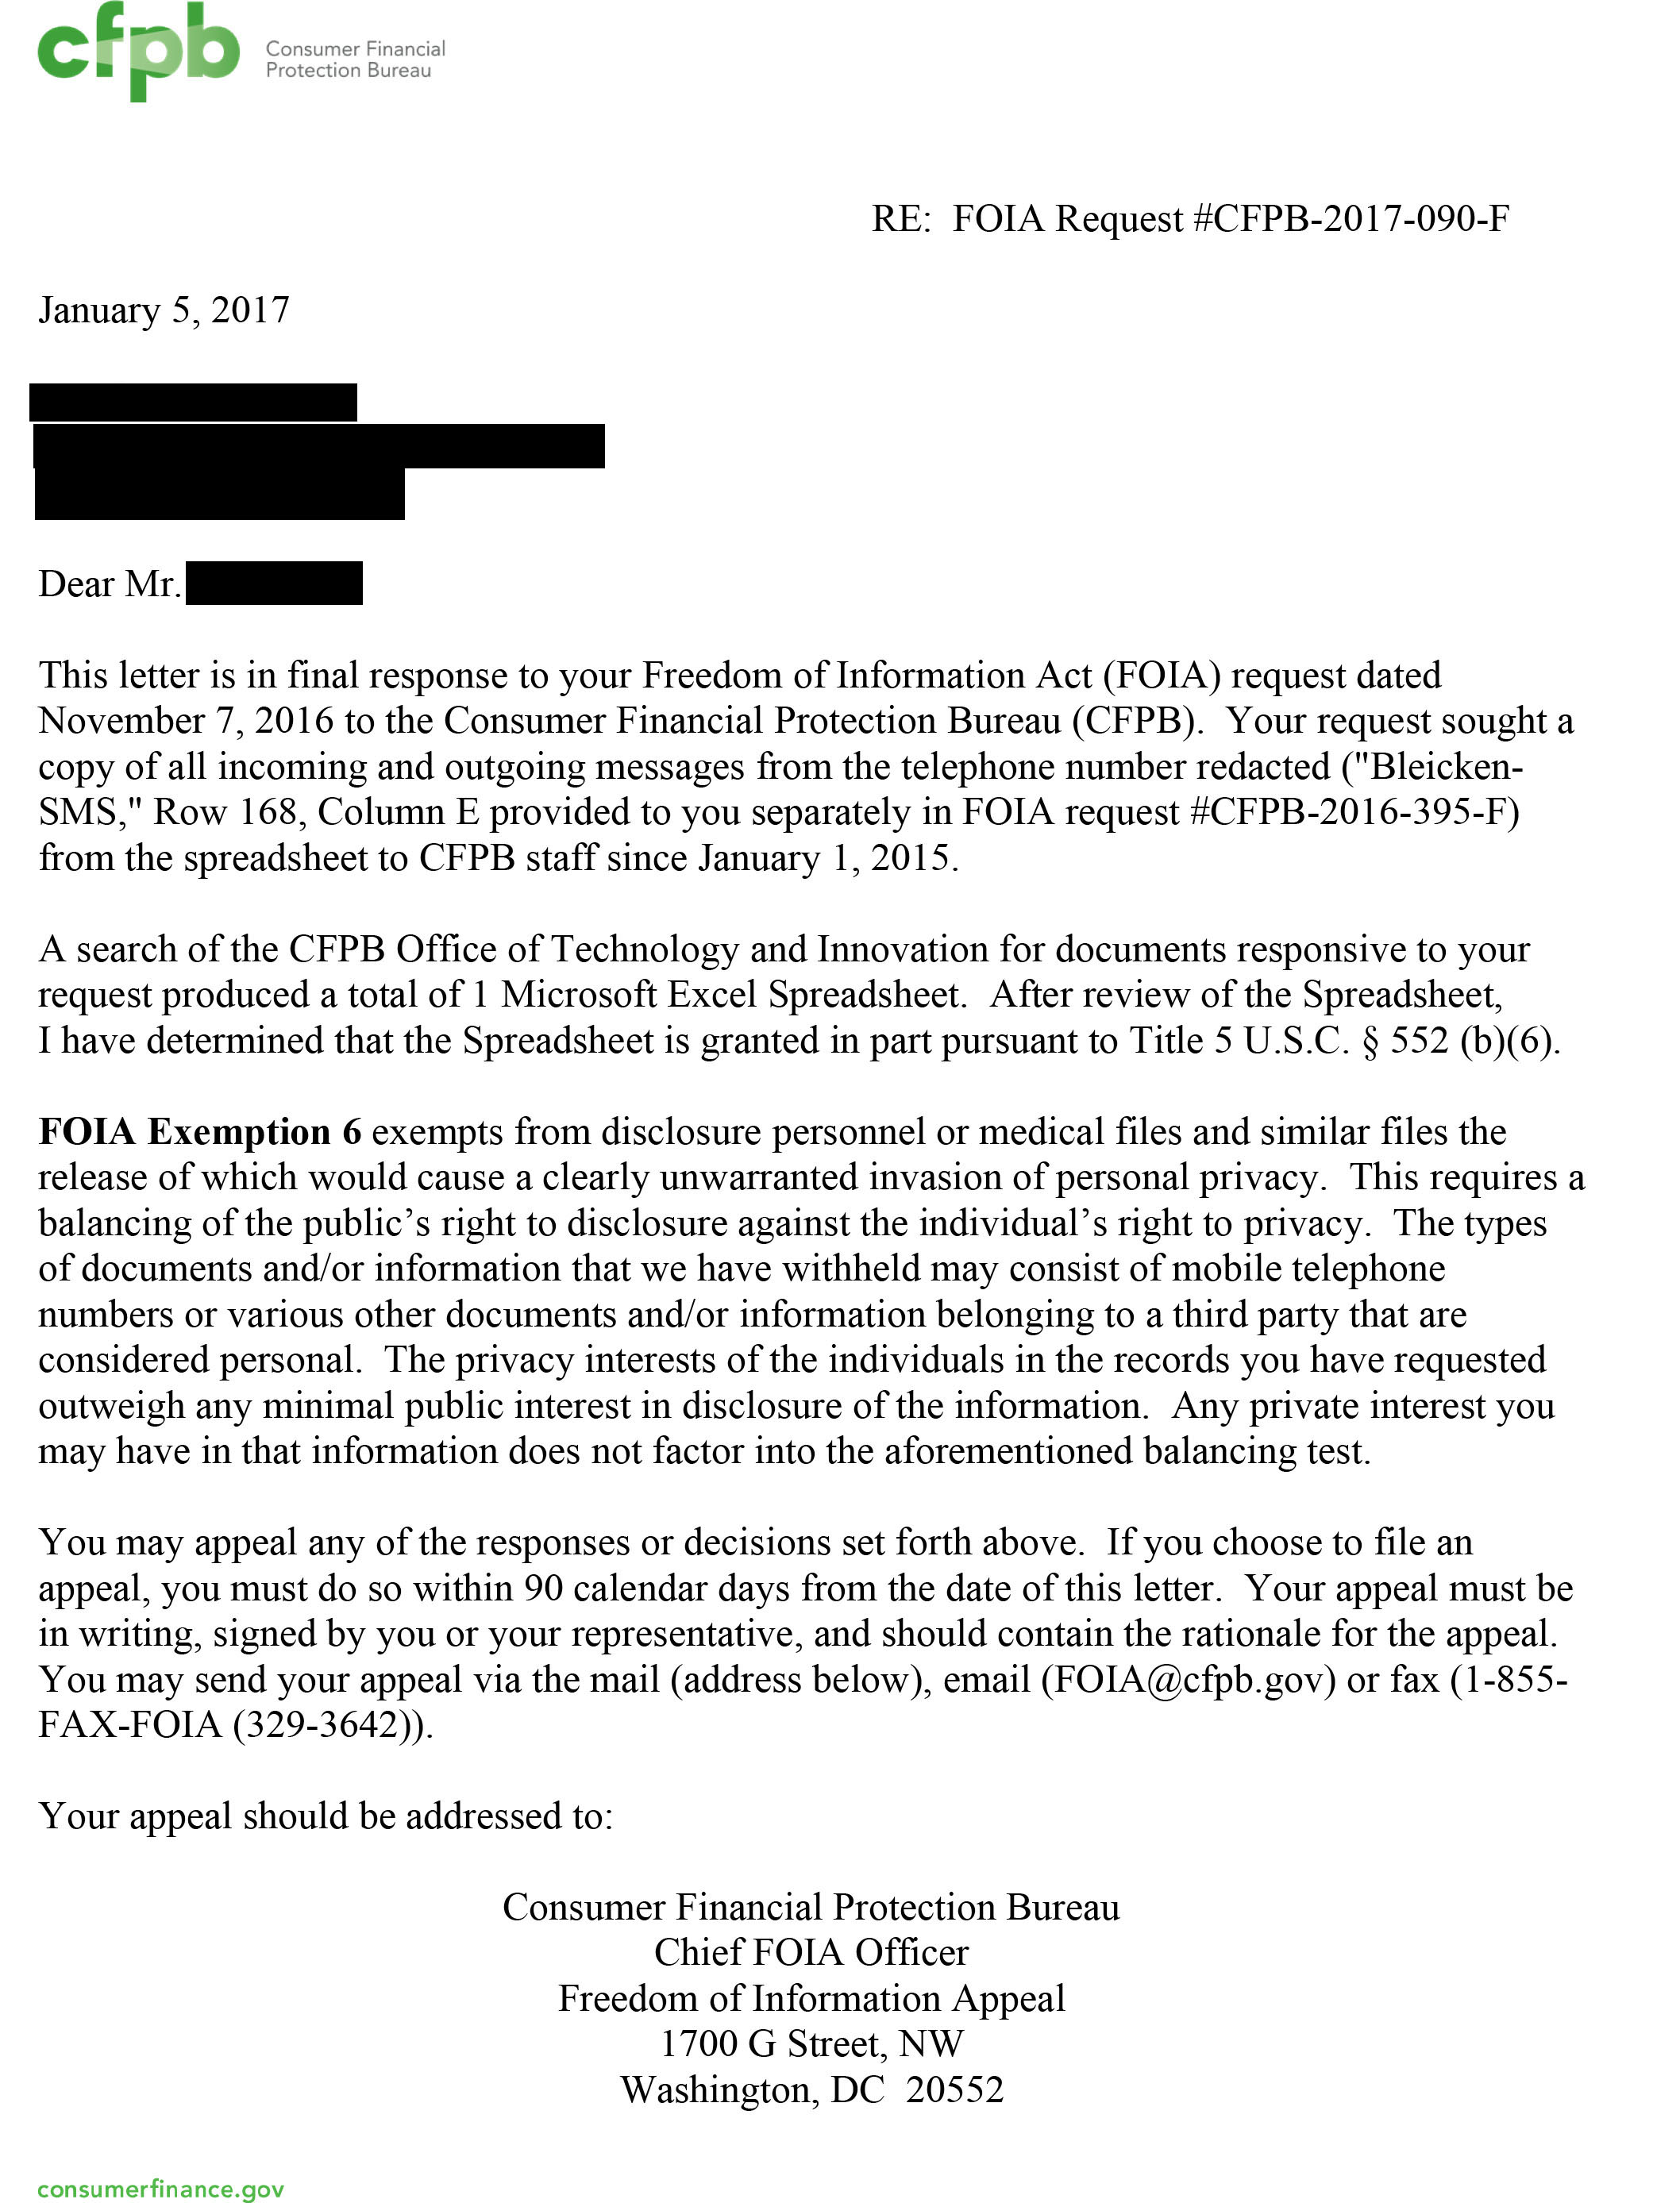 Letter in response to FOIA request, releasing texts and voicemails to and from CFPB staffers to and from Richard Cordray's private line, provided via a source.